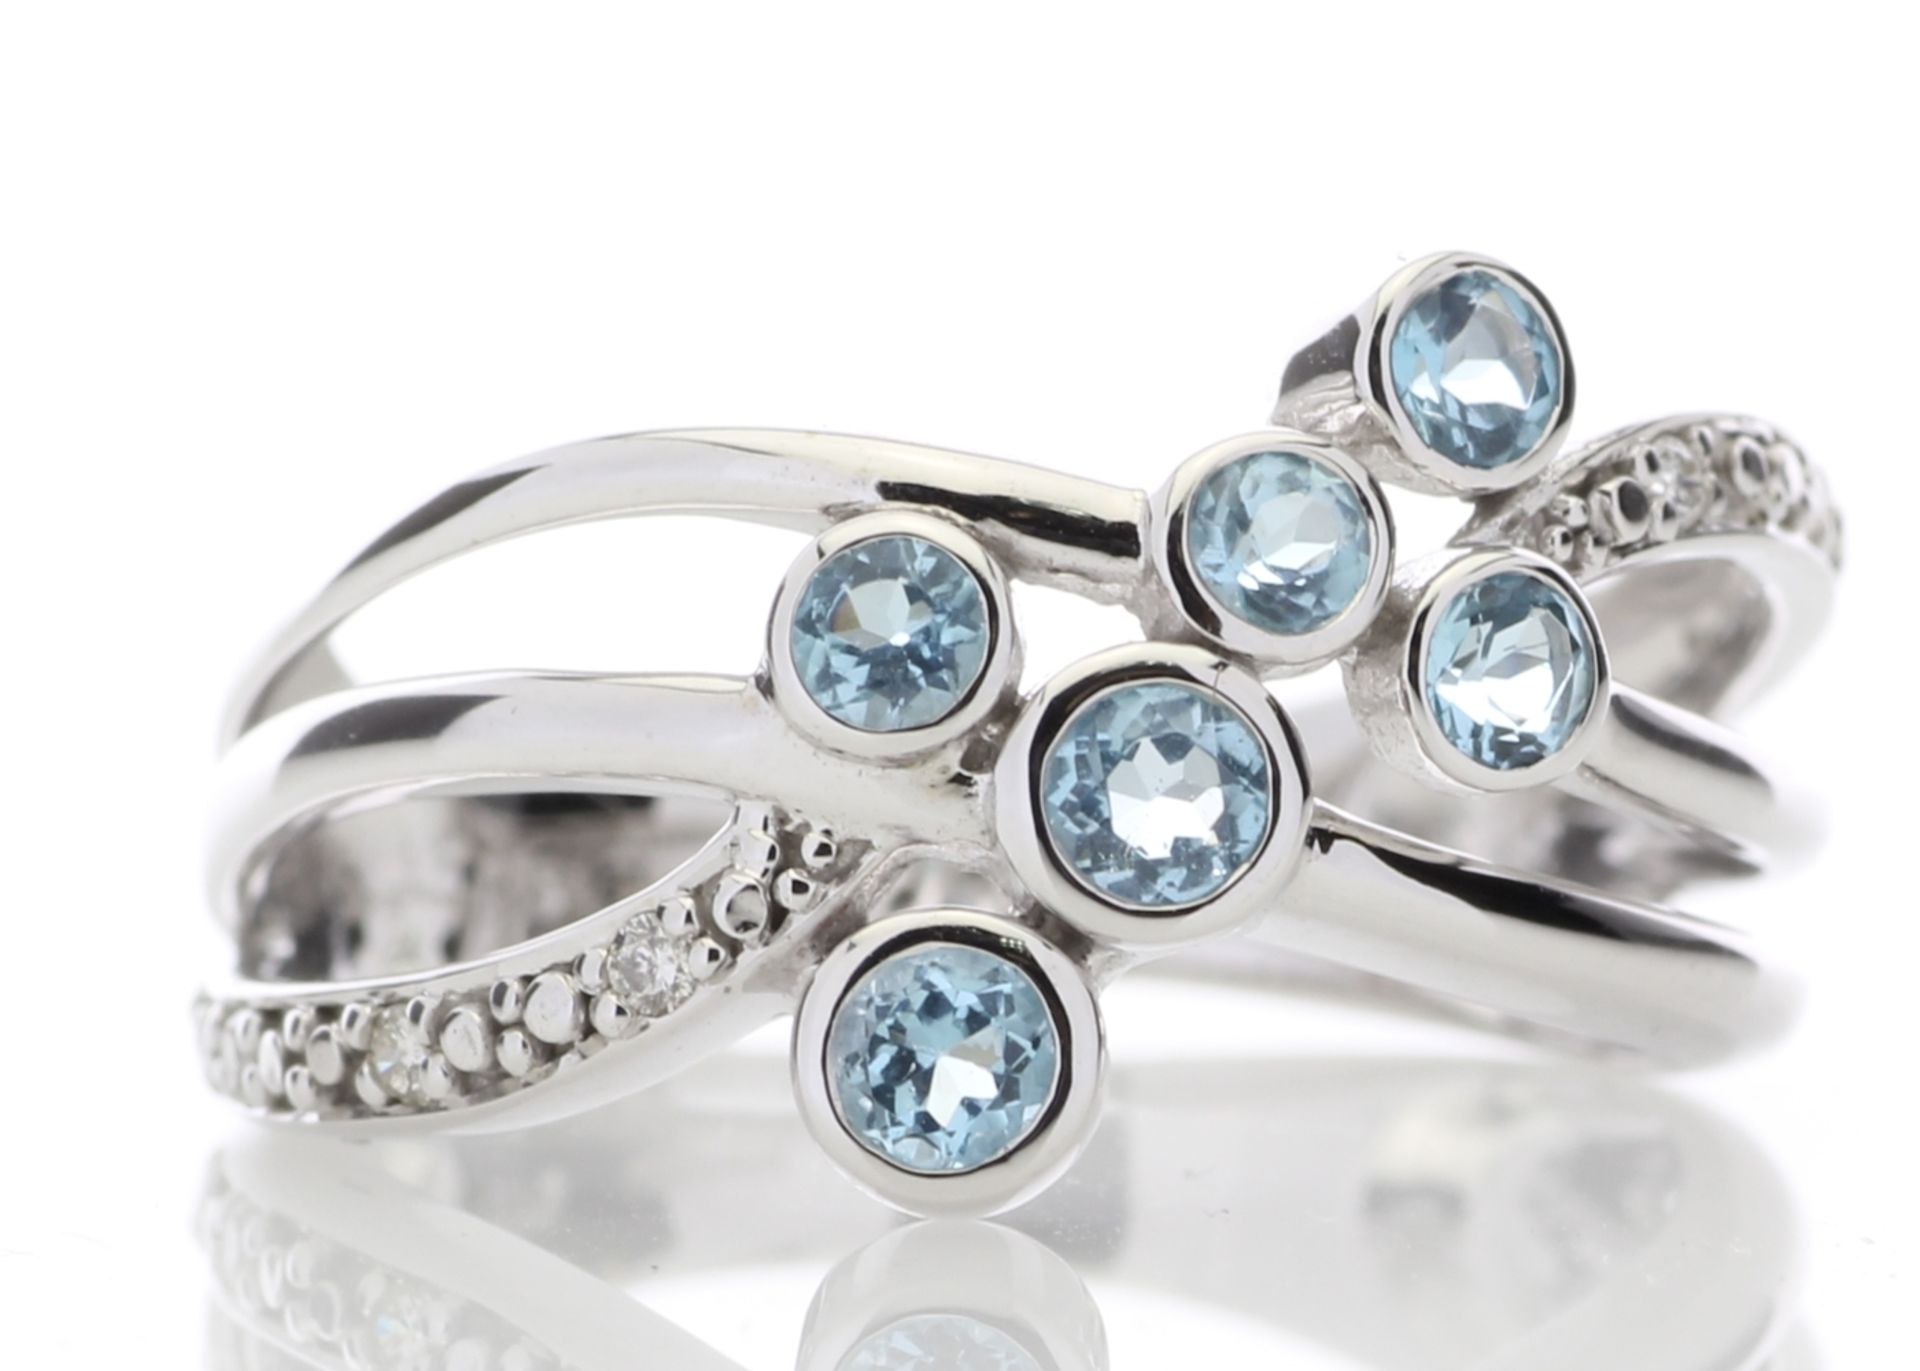 9ct White Gold Fancy Cluster Diamond And Blue Topaz Ring 0.06 Carats - Valued by GIE £1,970.00 - Six - Image 4 of 6